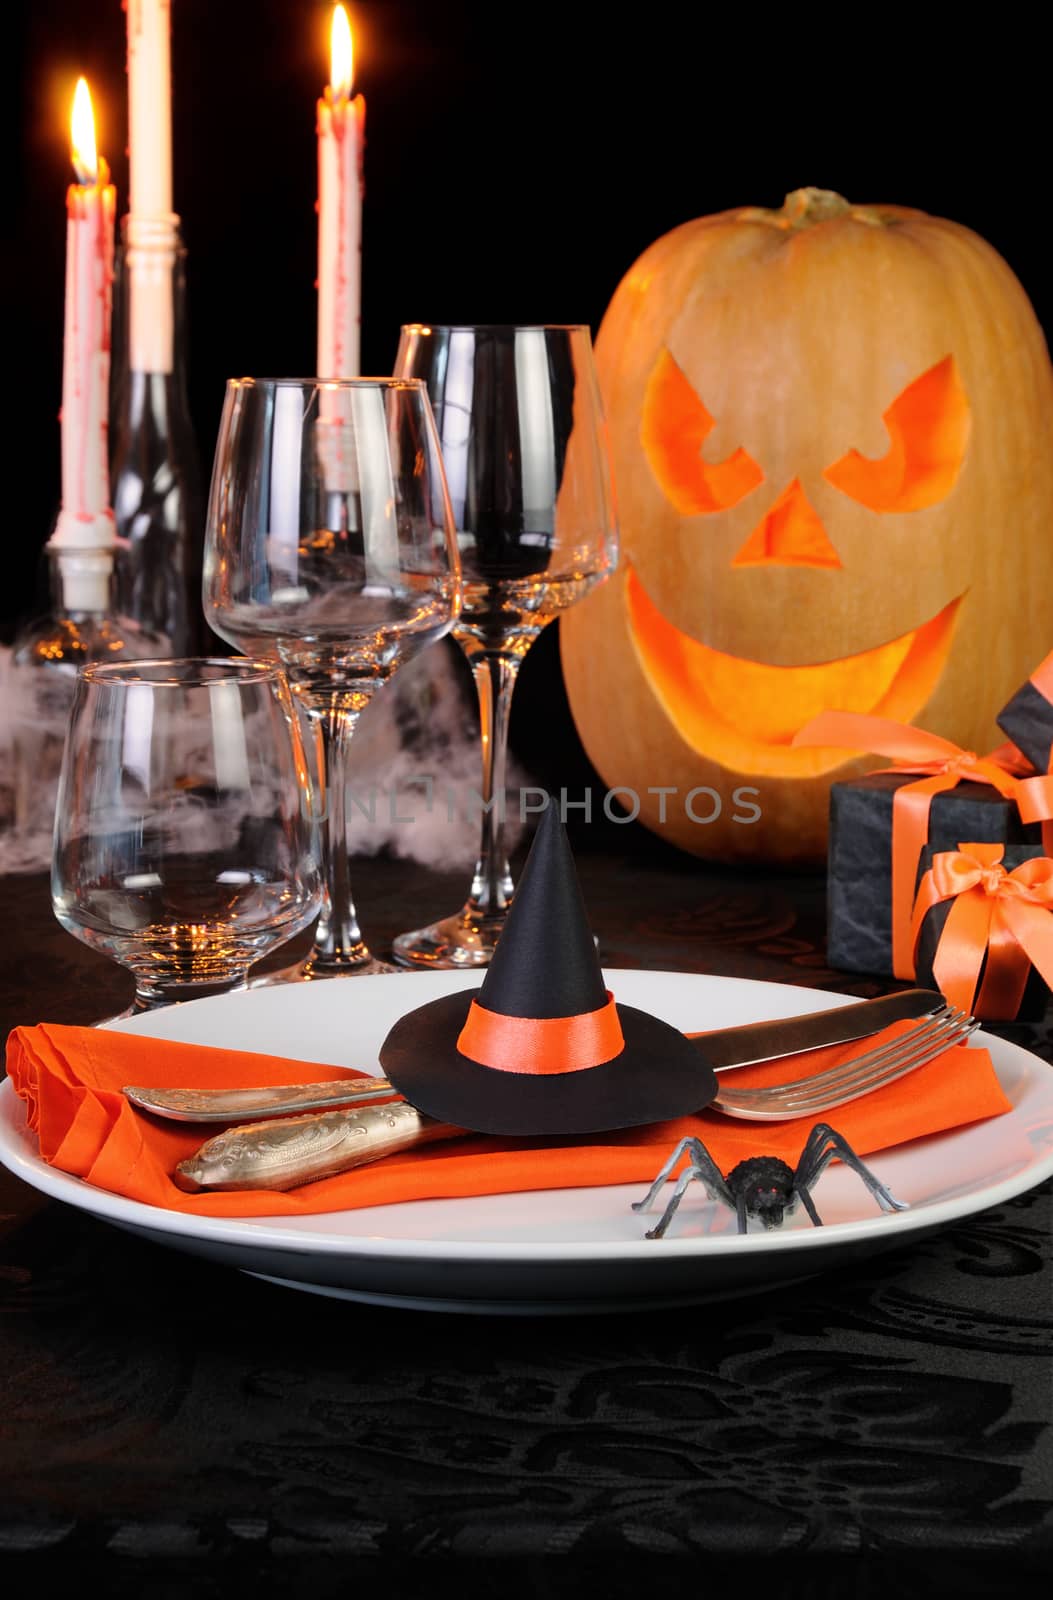 Witch's Hat as a decor element Halloween table setting